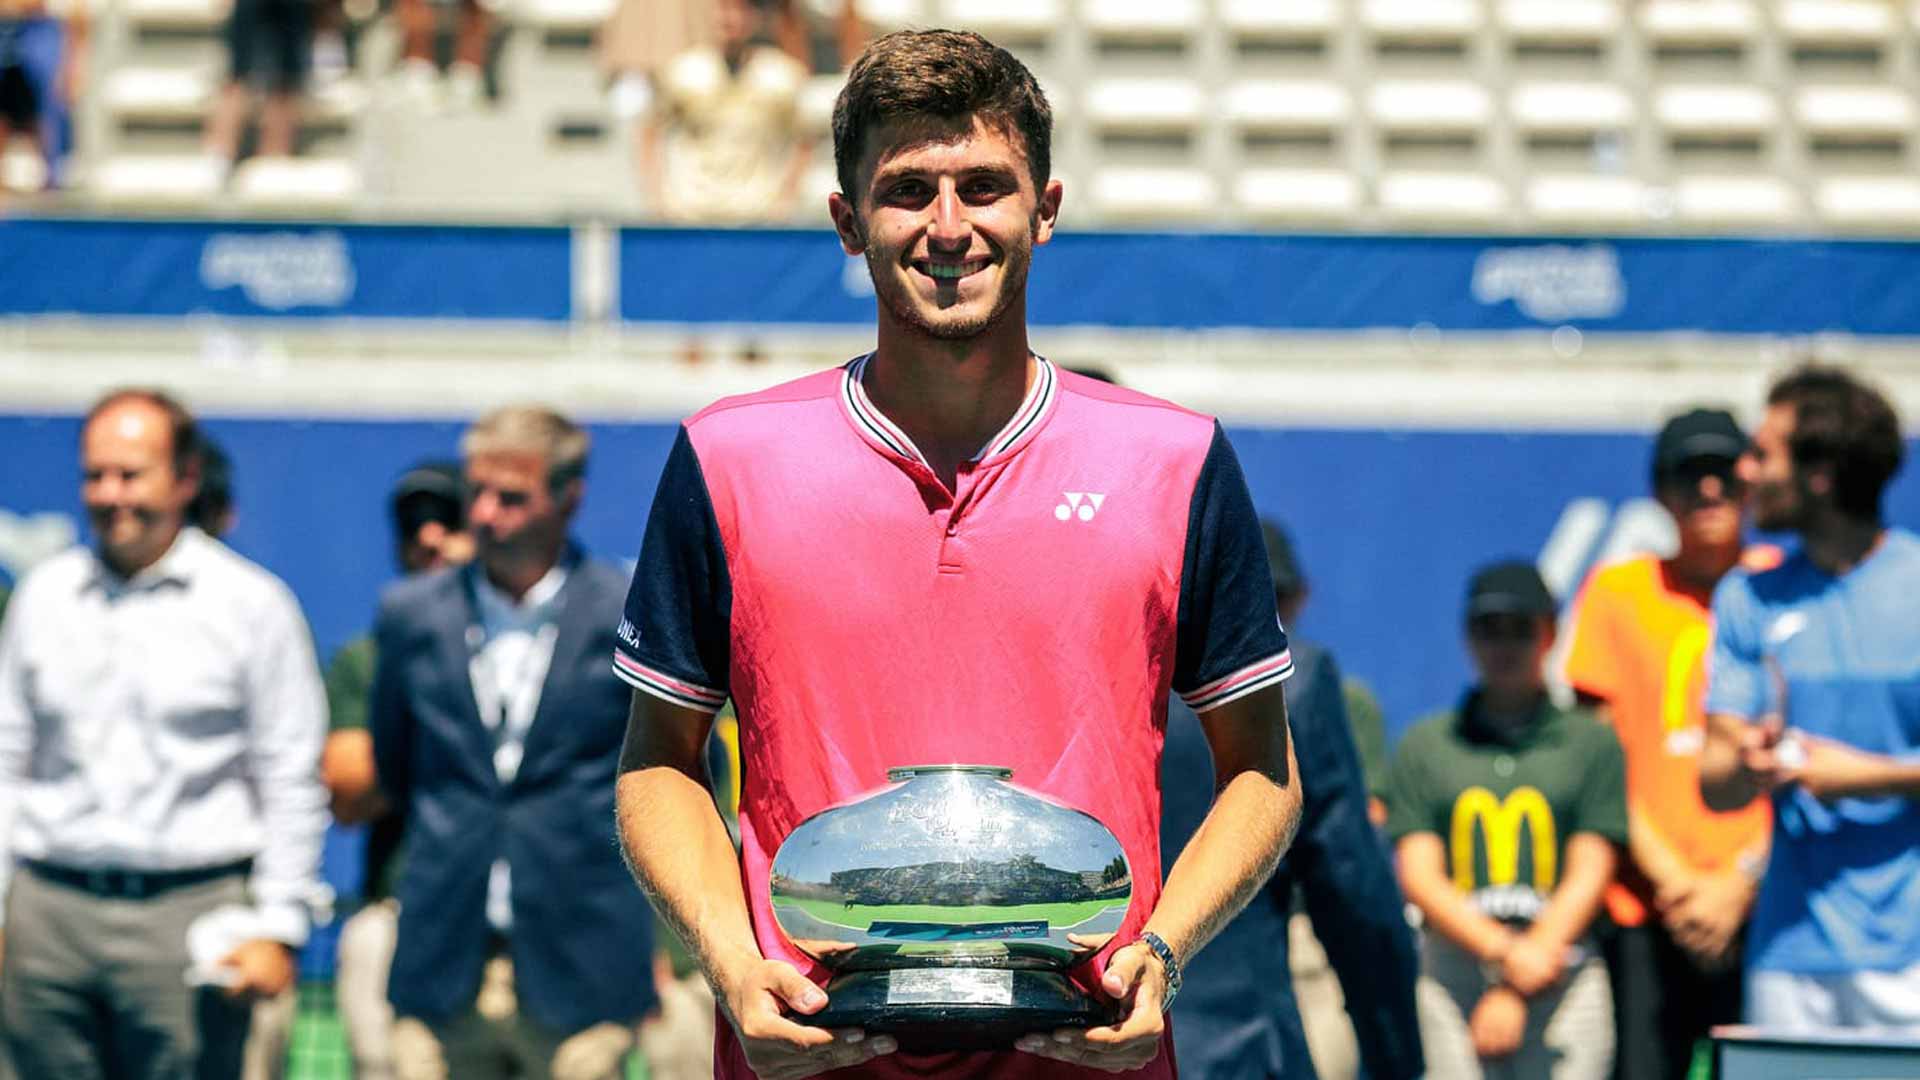 Luca Nardi wins the ATP Challenger Tour 125 event in Porto, Portugal.